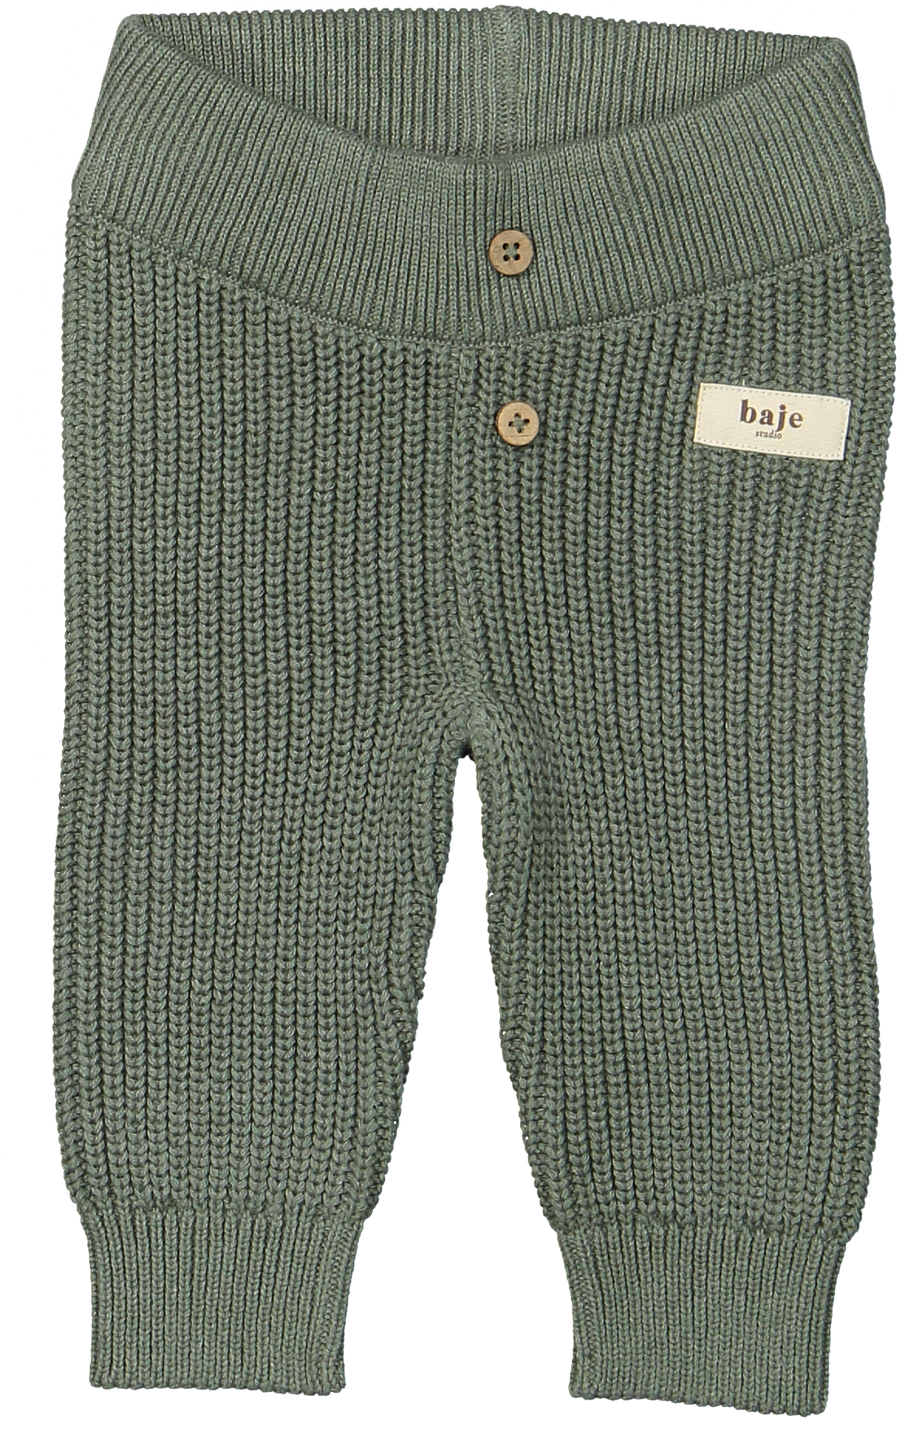 BABY KNITTED PANTS - GREEN - 50&62